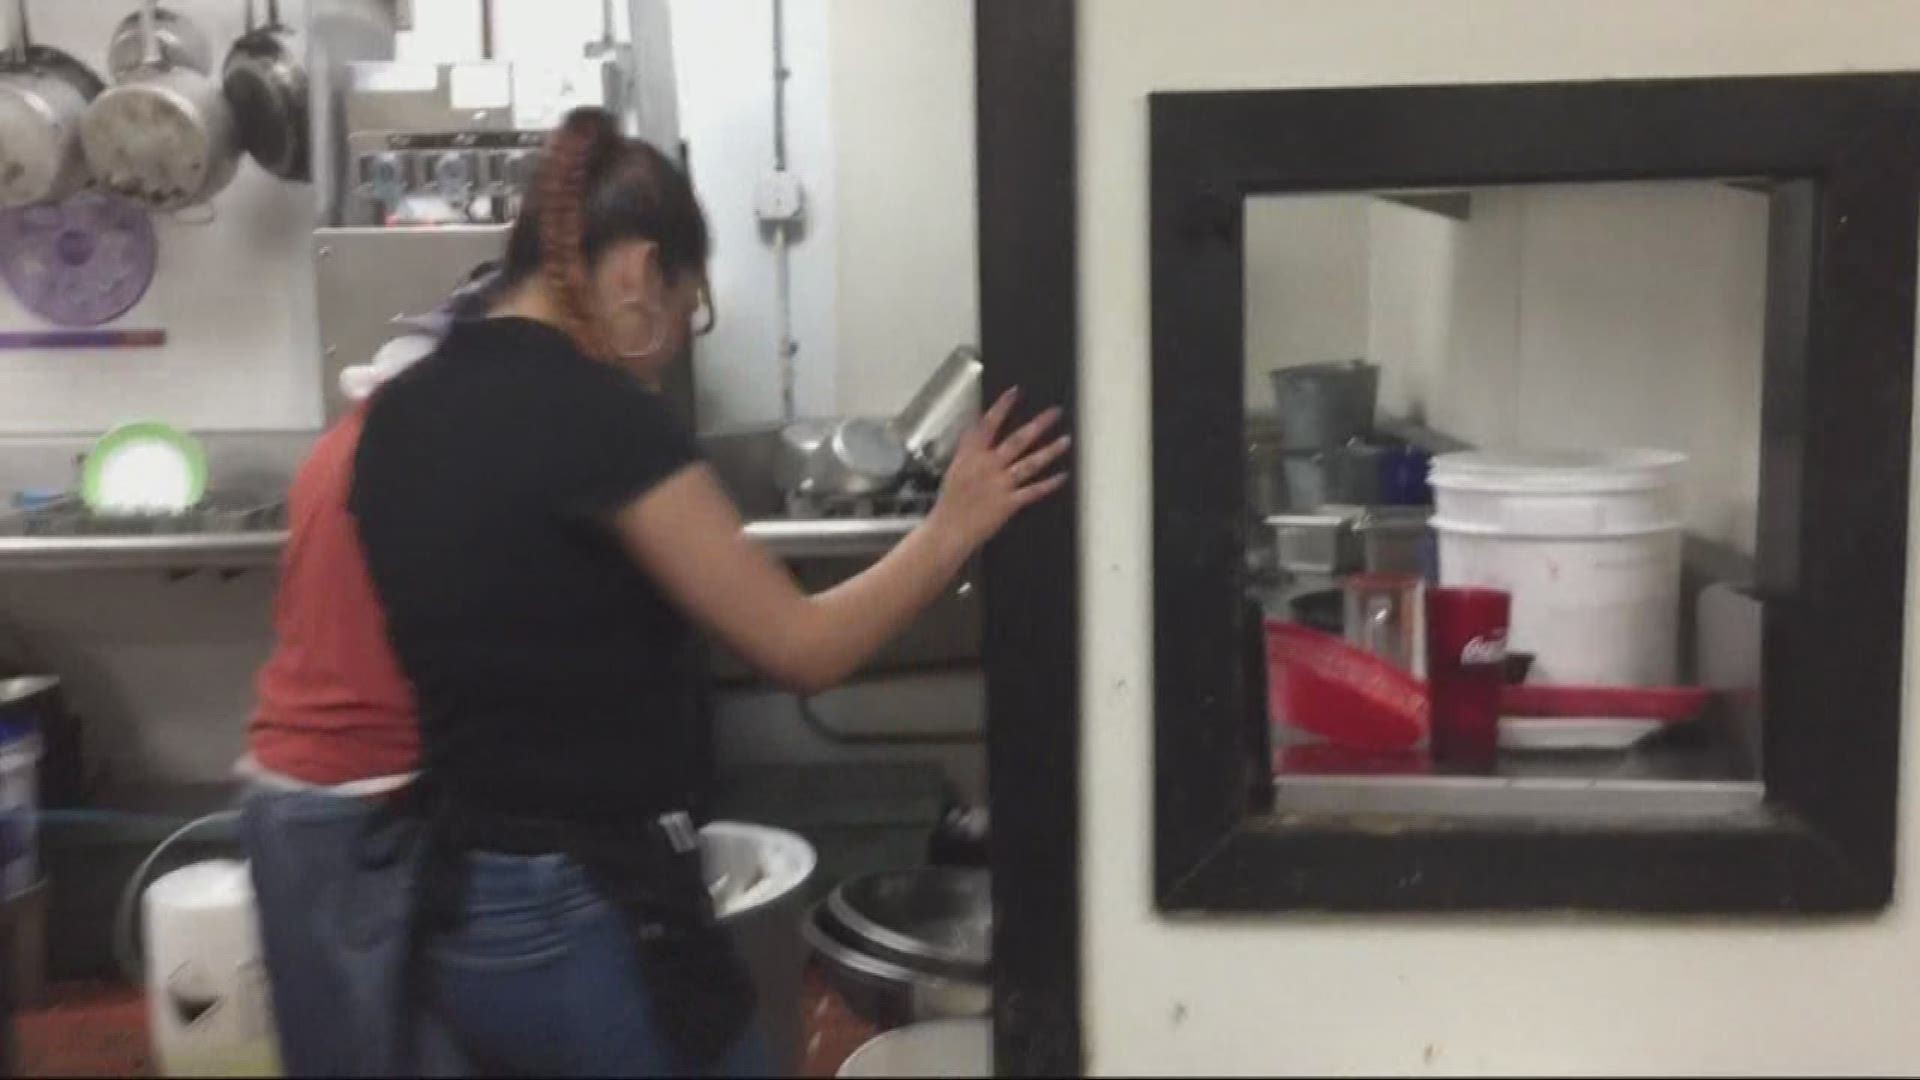 A local restaurant was cited for not having a toilet seat in the women's restroom.